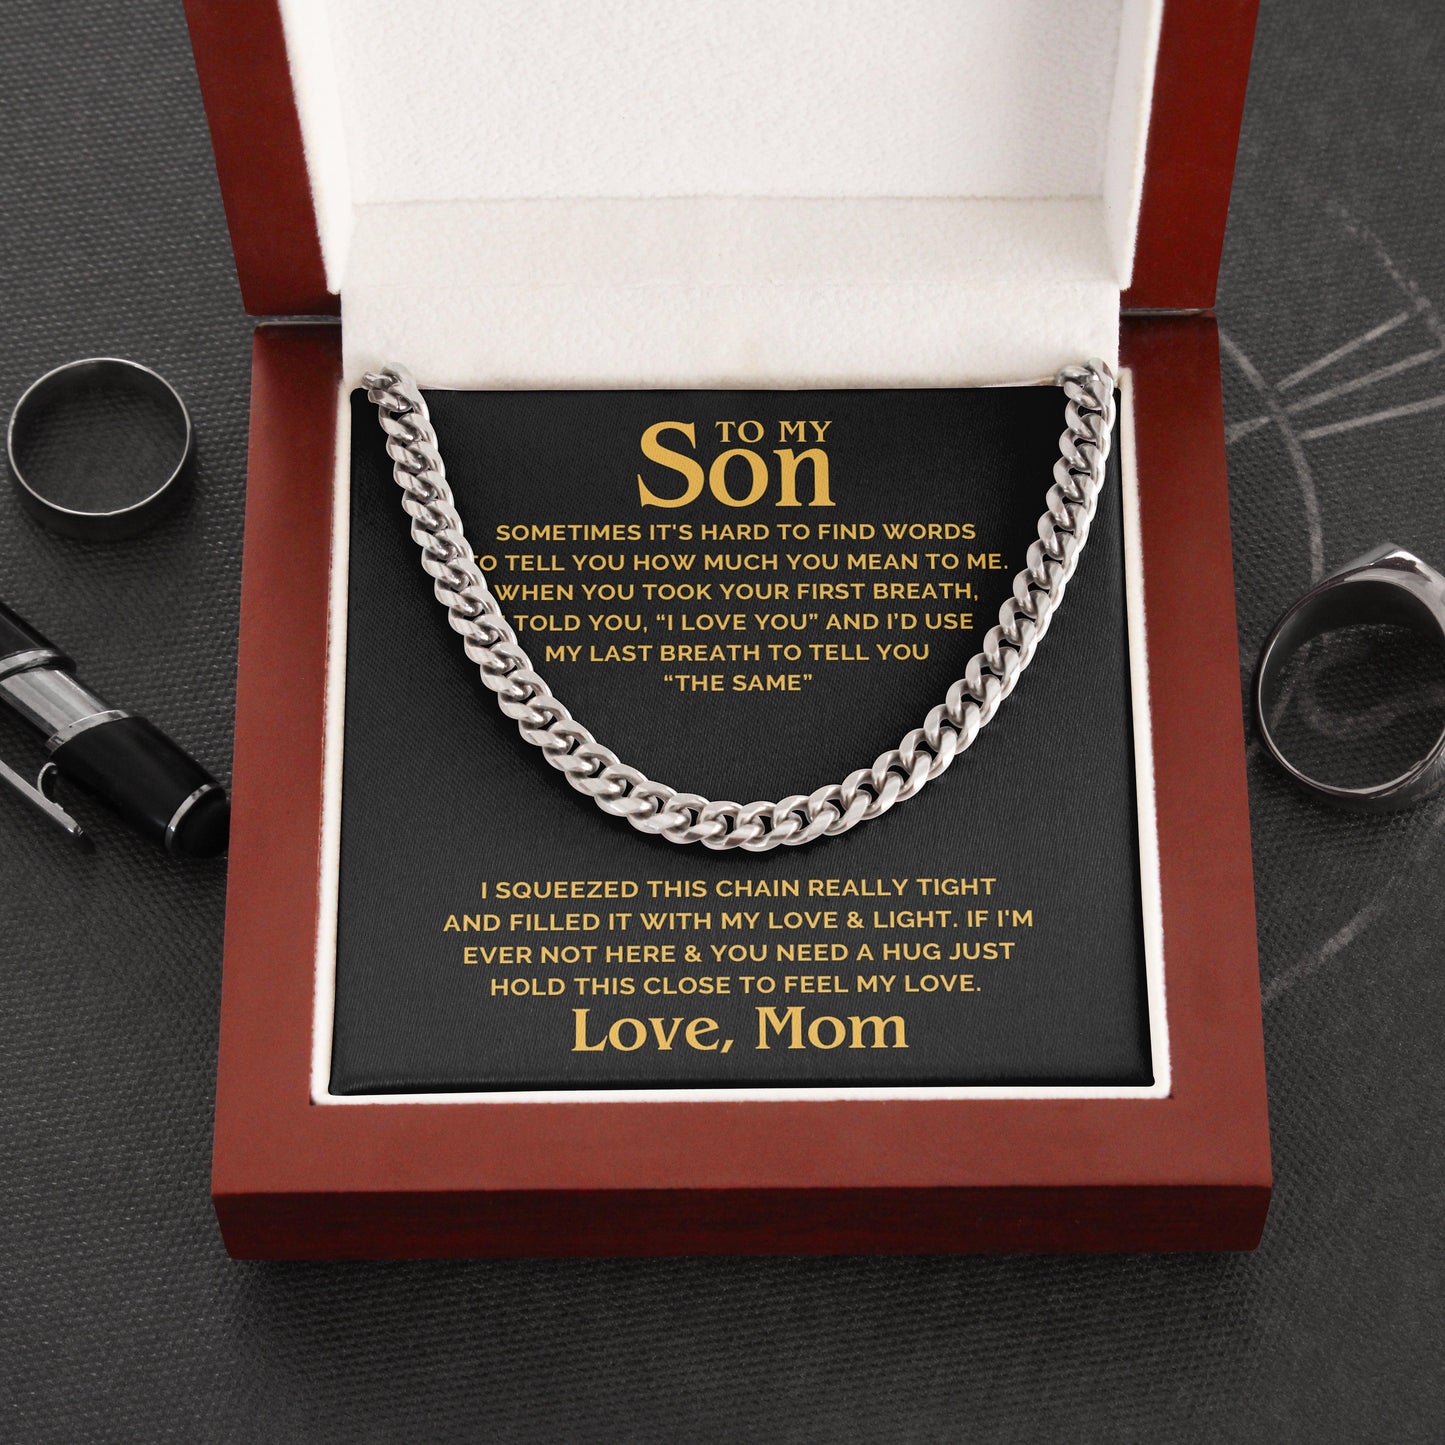 Jewelry gifts Son - Hug & Hold - Cuban Link Chain - Belesmé - Memorable Jewelry Gifts